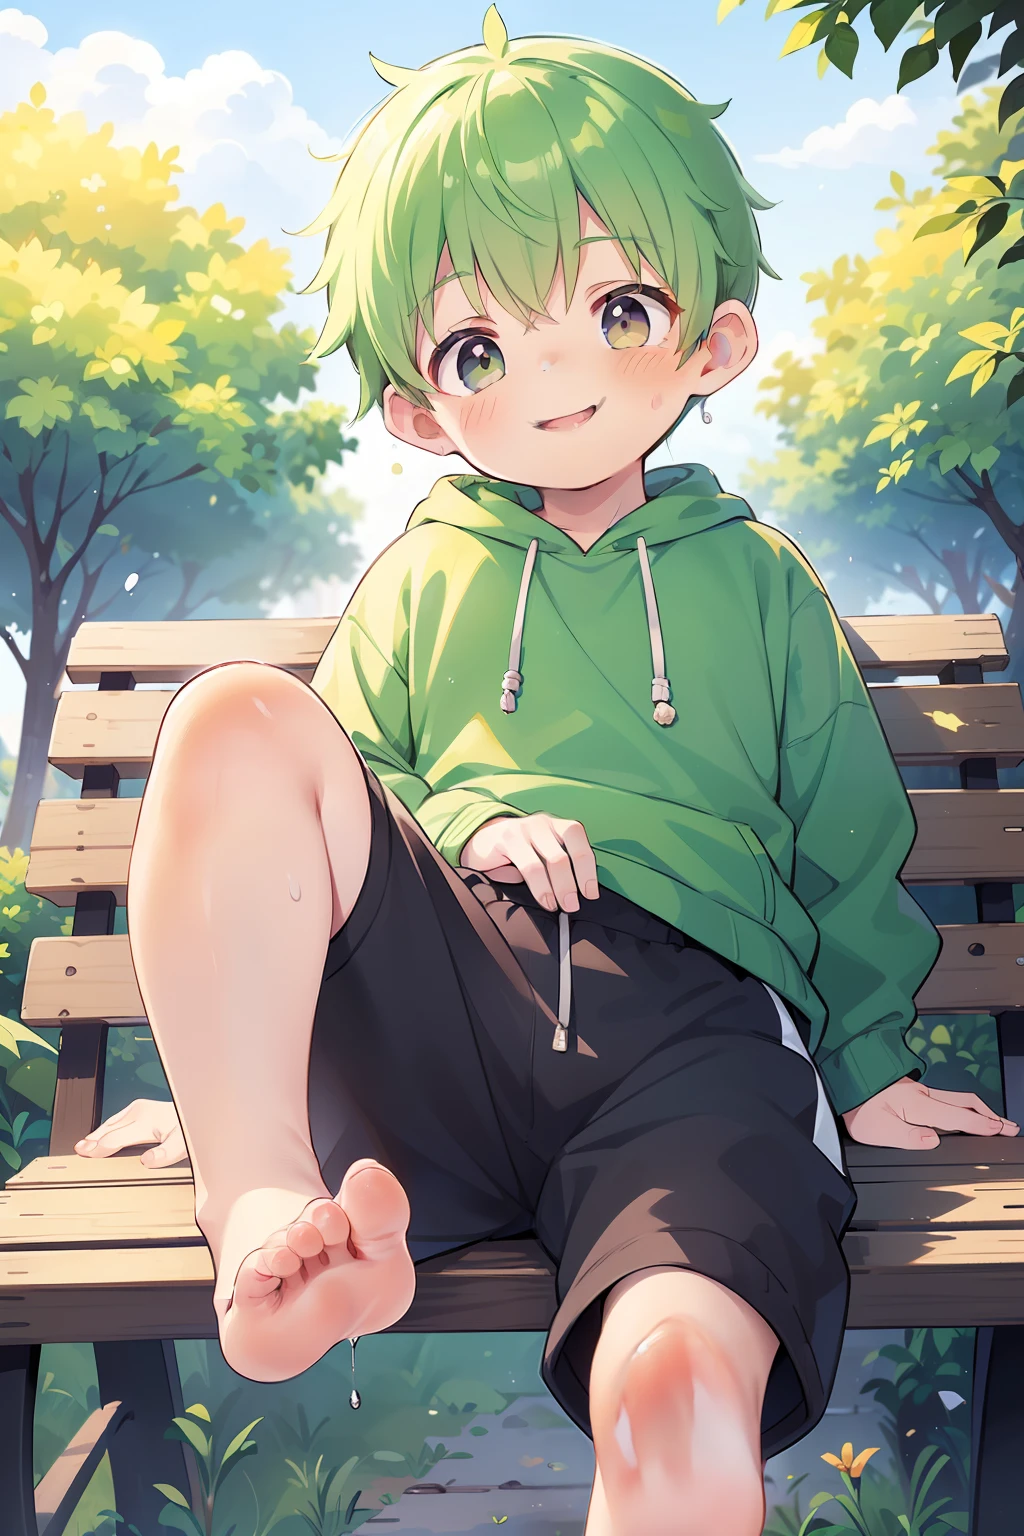 Masterpiece, chubby Little boy with green hair and shiny bright orange colored eyes and wearing a hoodie, and oversized sweatpants sitting on a bench in a park showing his foot, young, boy, child, small, toddler, (sweatpants:1.4), (Boy:1.5), (Shota:1.6), (Young:1.4), (Male:1.6), (smiling:1.4), (foot:1.6), (shy:1.4), (blushing:1.0), (shorthair:1.7)